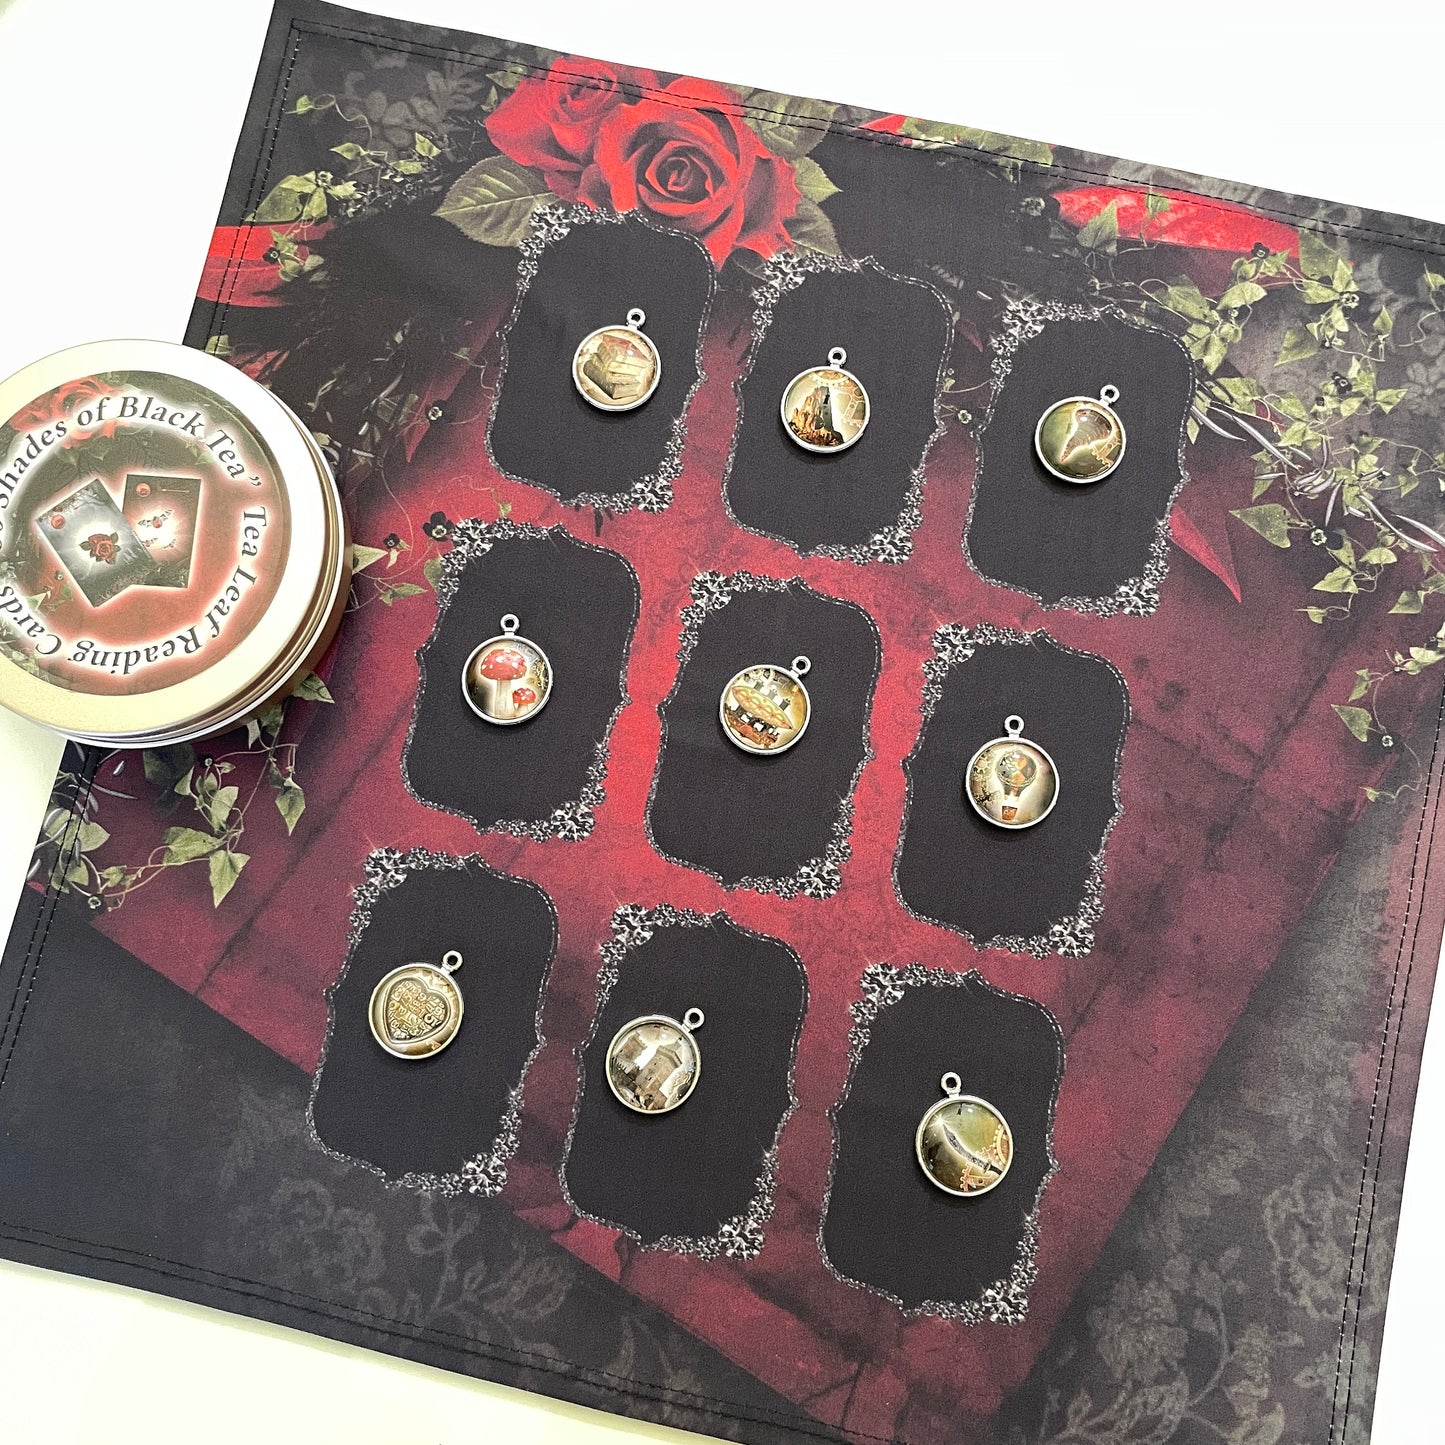 Red and Black 9 Box Charm casting mat Oracle Cards *gift for her Tarot Lenormand *gift Readings Runes Bone Casting Cloth